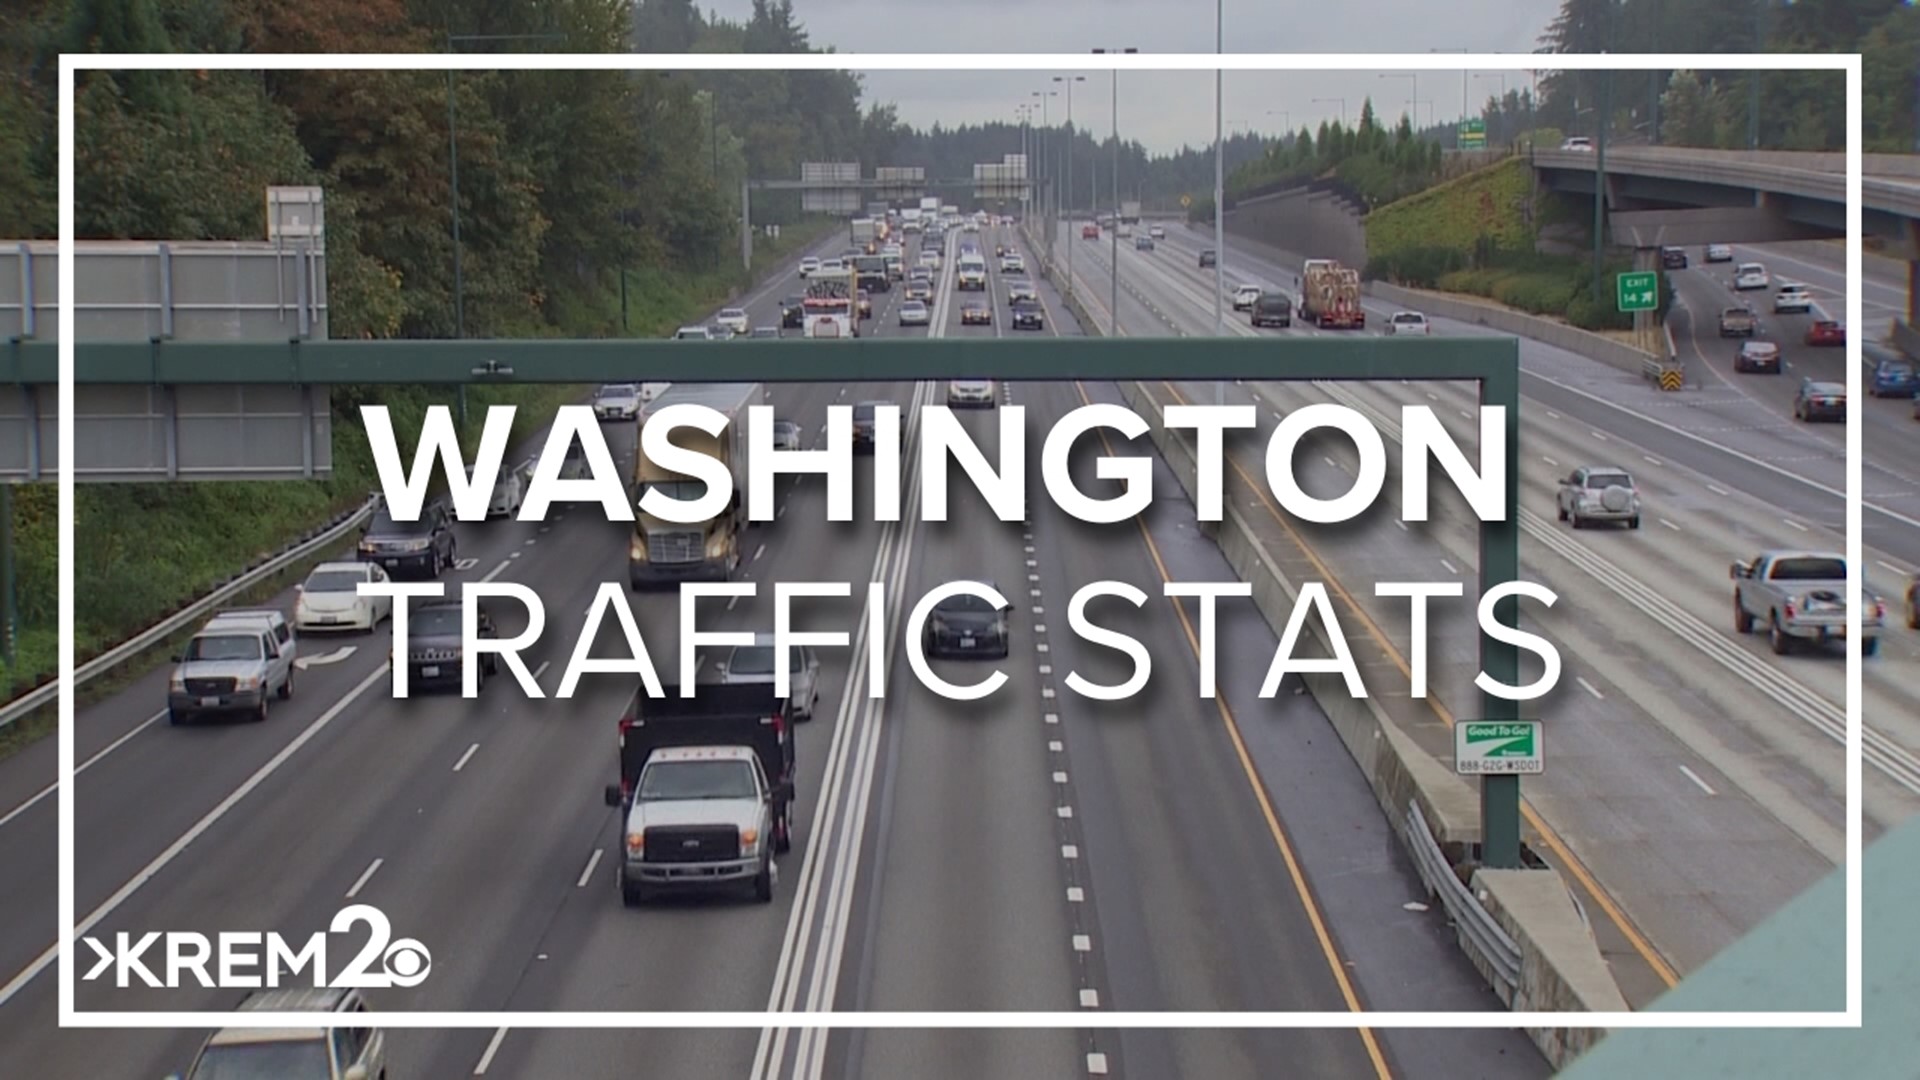 By July 31, 2022, 413 traffic deaths were reported. By July 31, 2023, 417 people had died on Washington's roads.